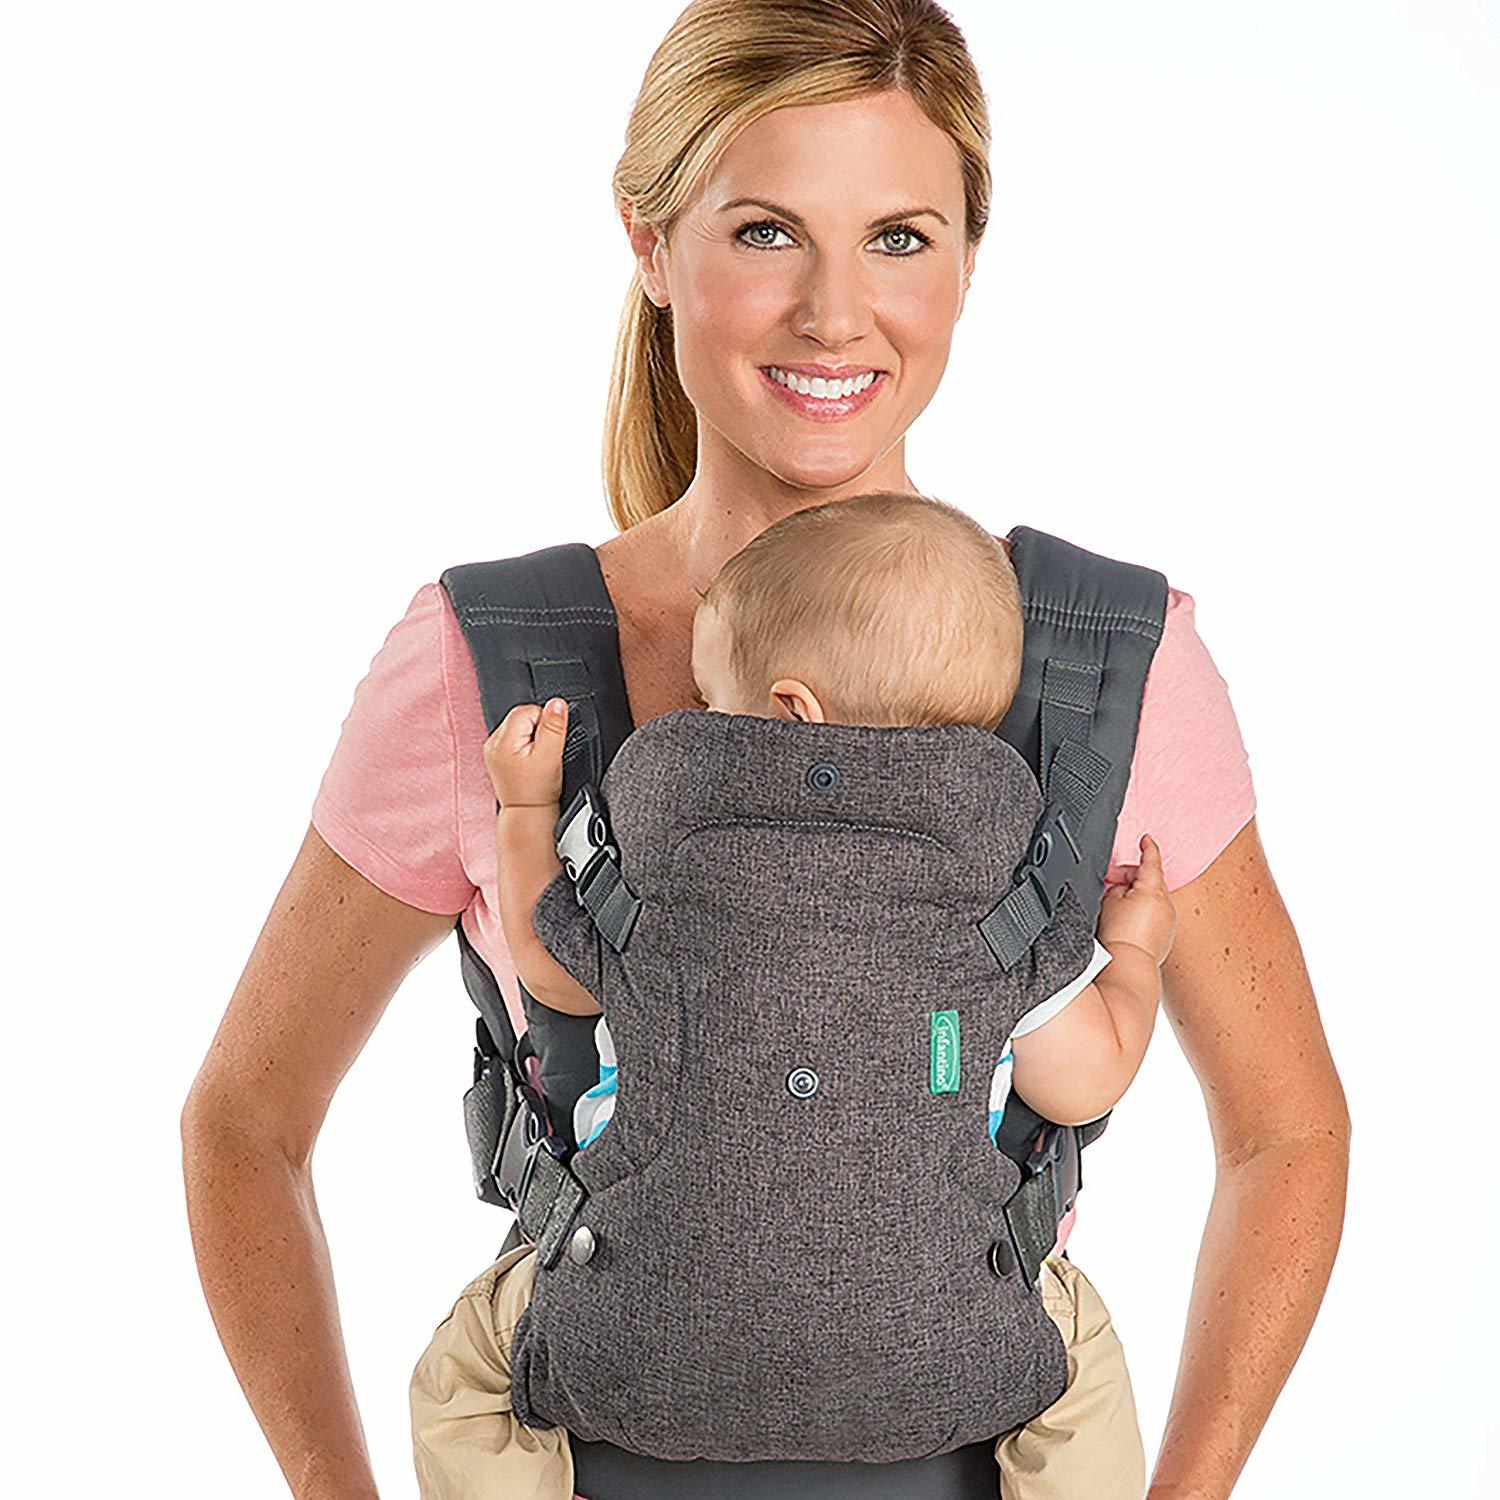 Infantino Flip Advanced 4-in-1 Convertible Carrier 13